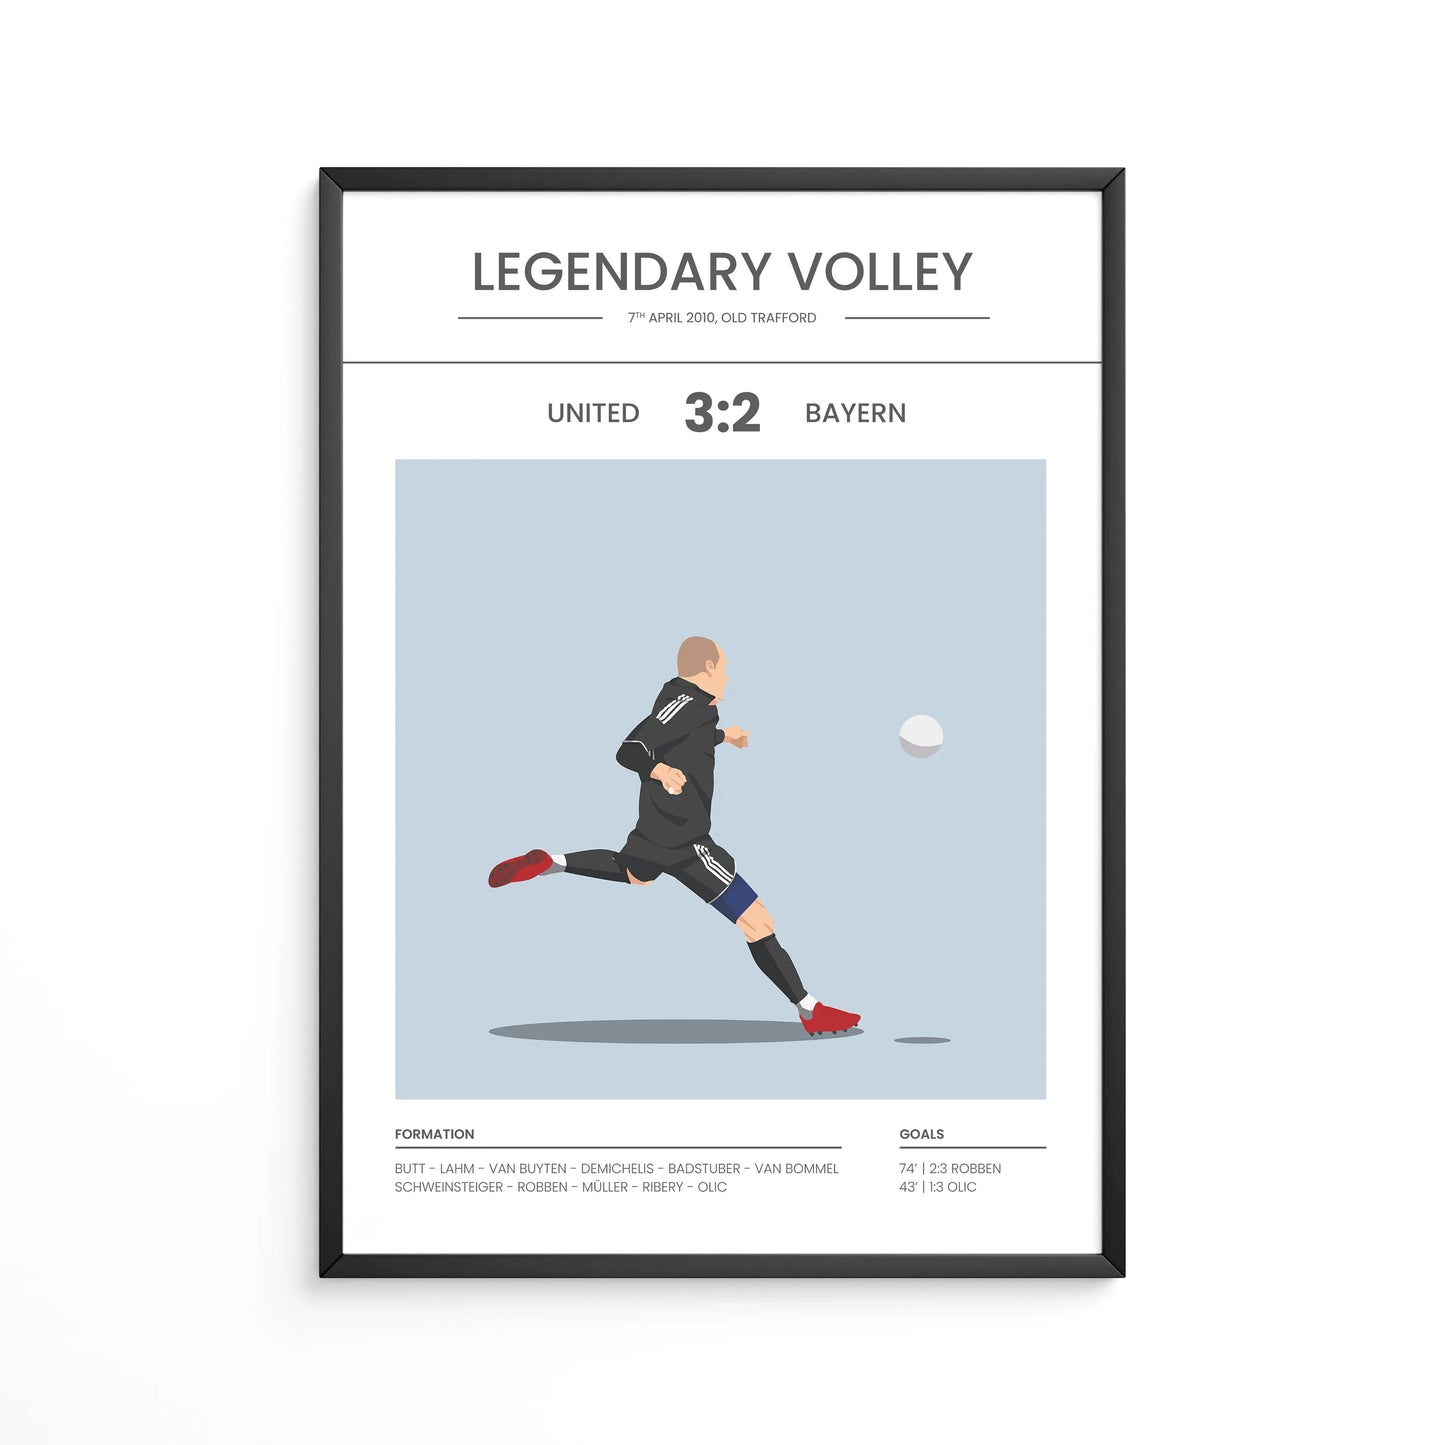 Volley hammer from Robben | Moment of Glory